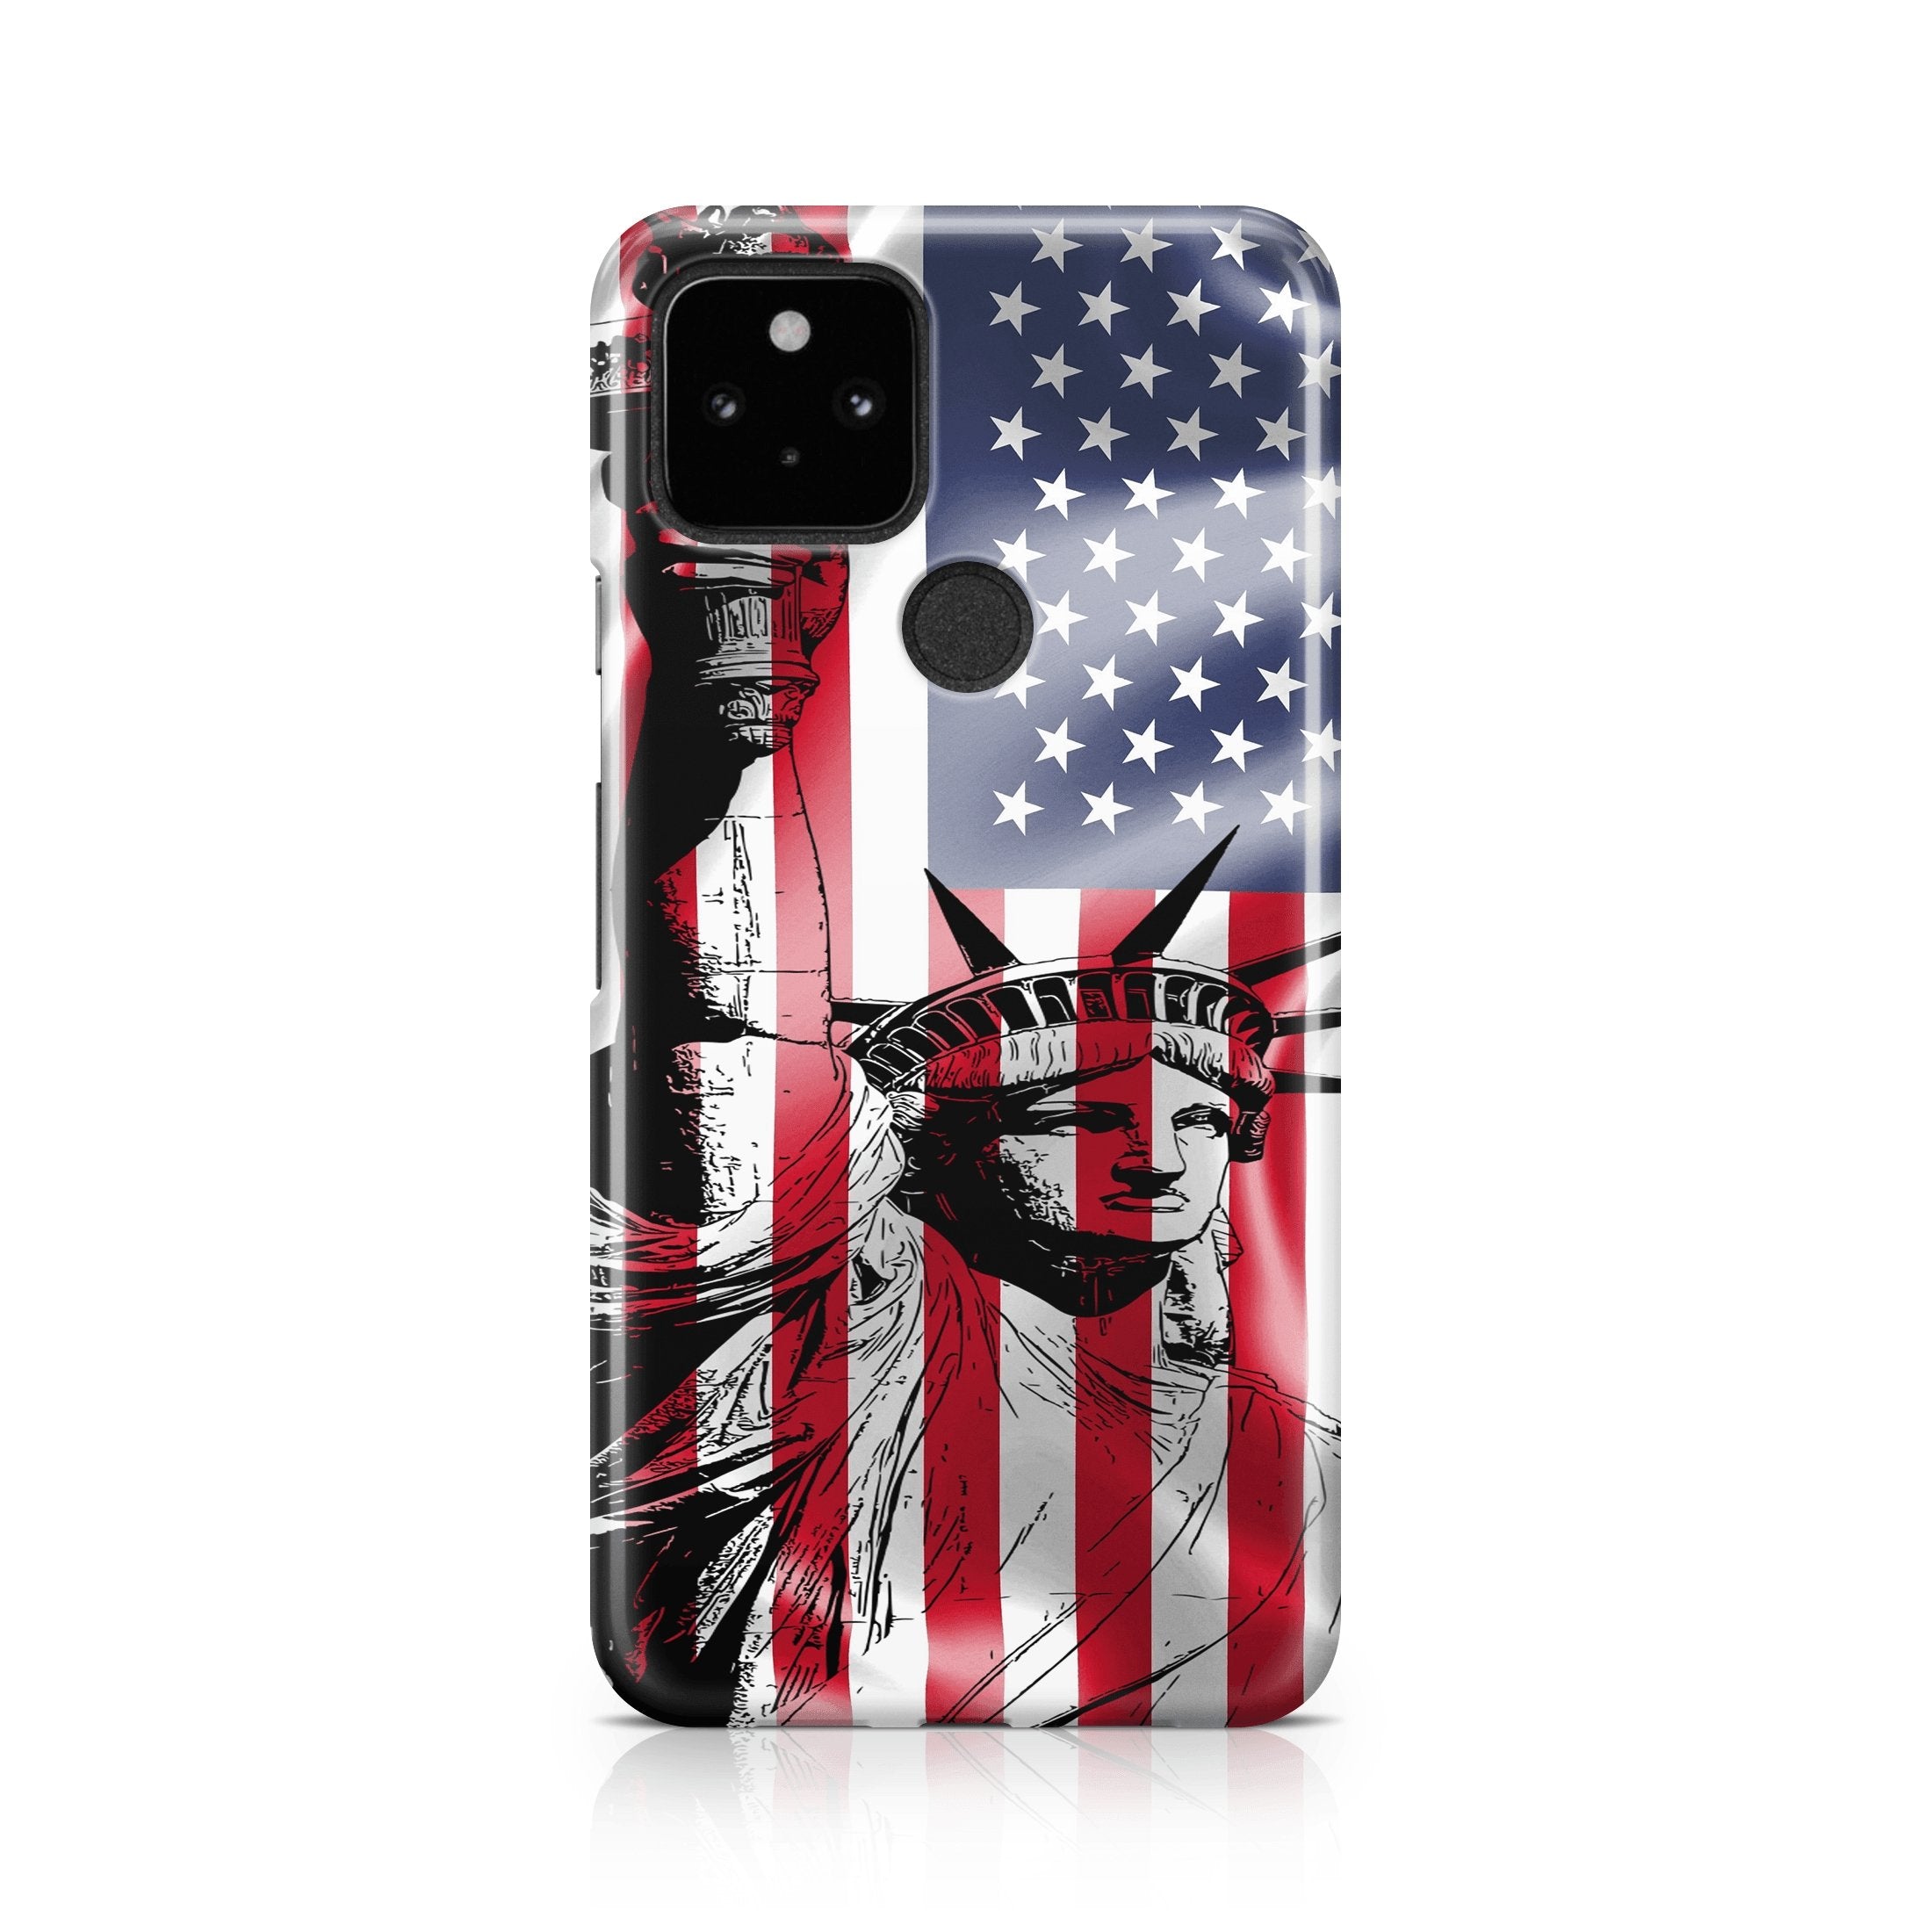 Lady Liberty American Flag - Google phone case designs by CaseSwagger